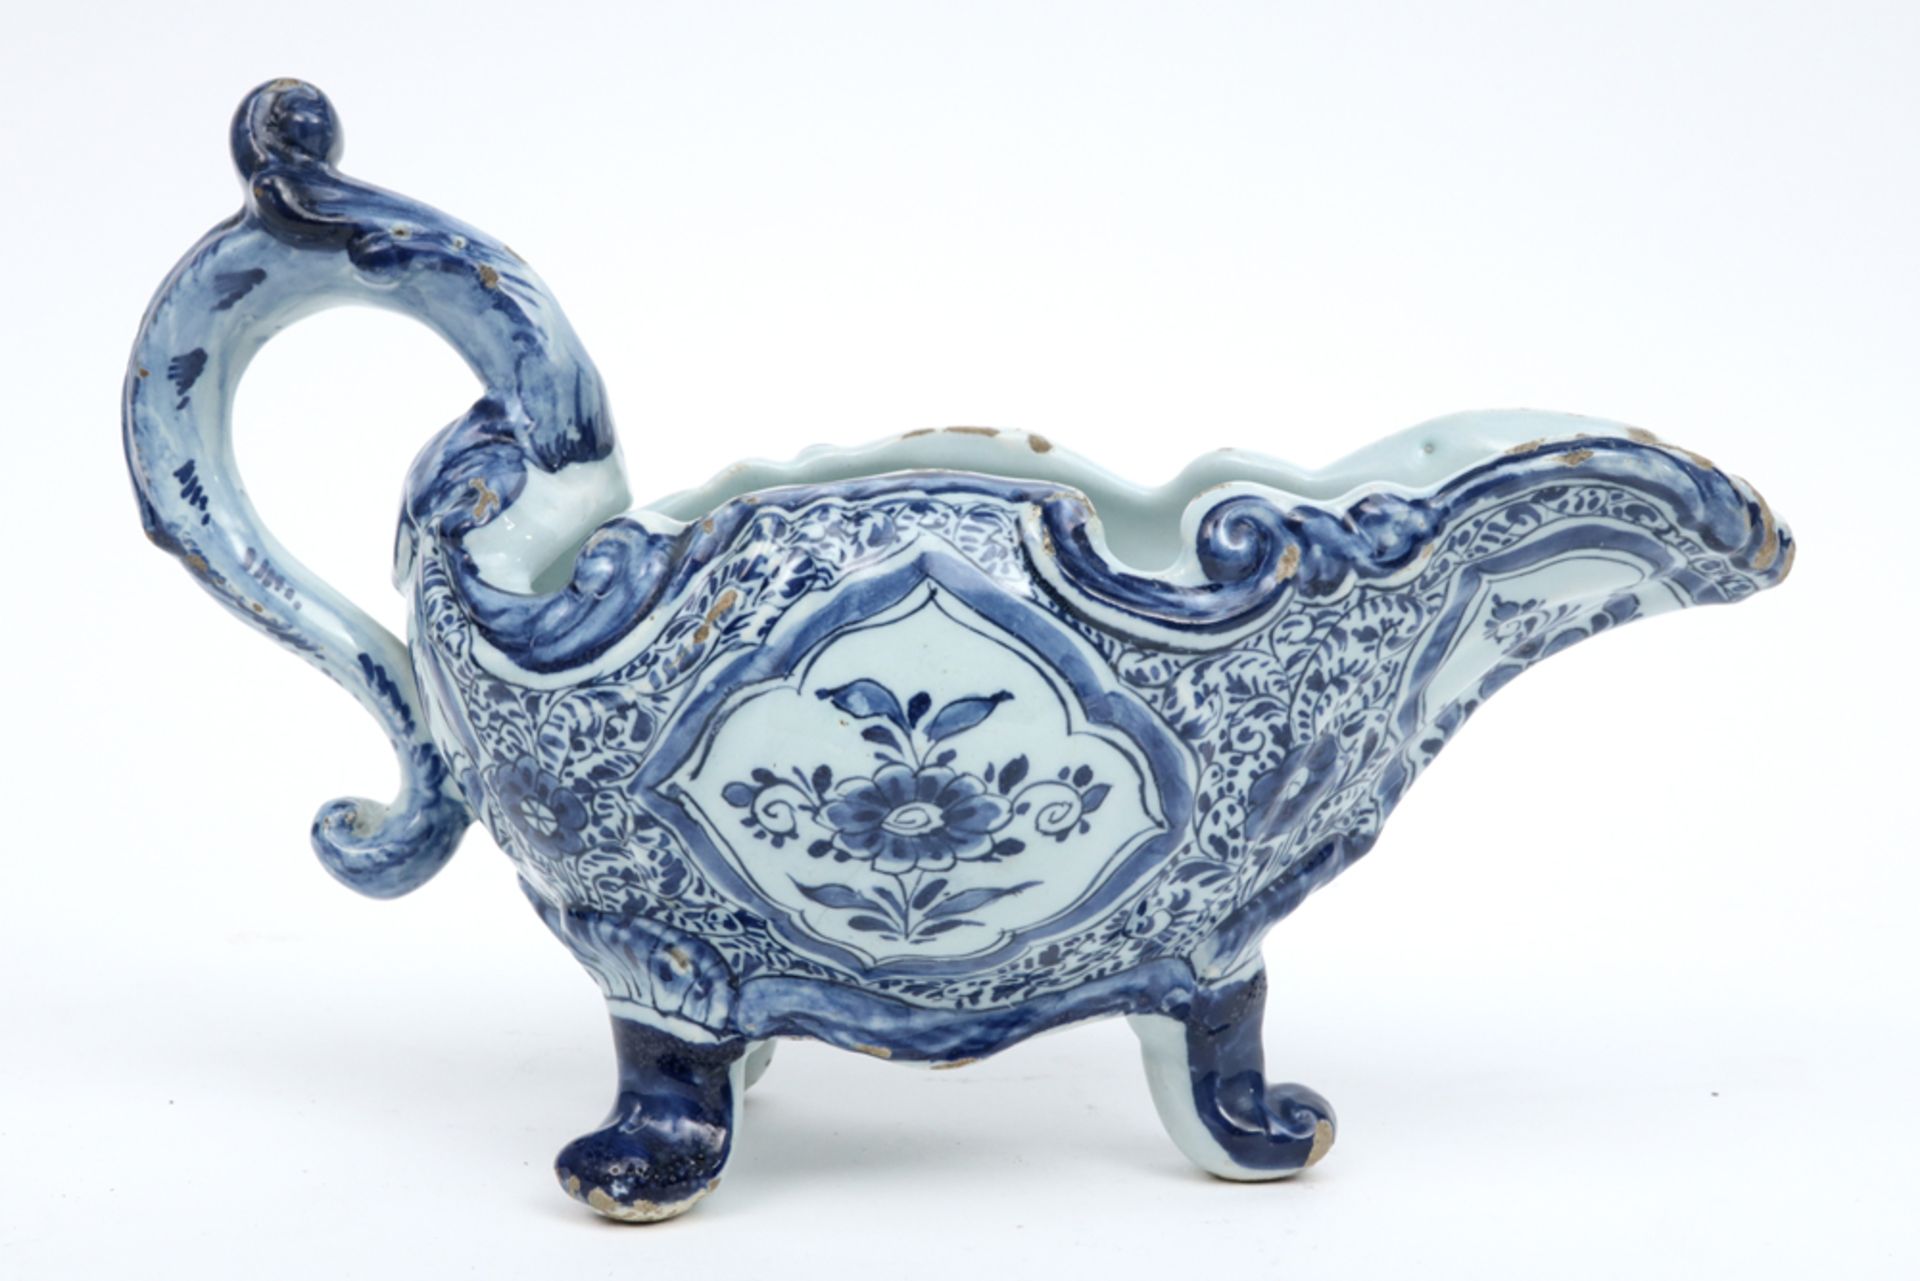 18th Cent. sauce boat in marked ceramic from Delft with a blue-white decor || Achttiende eeuwse